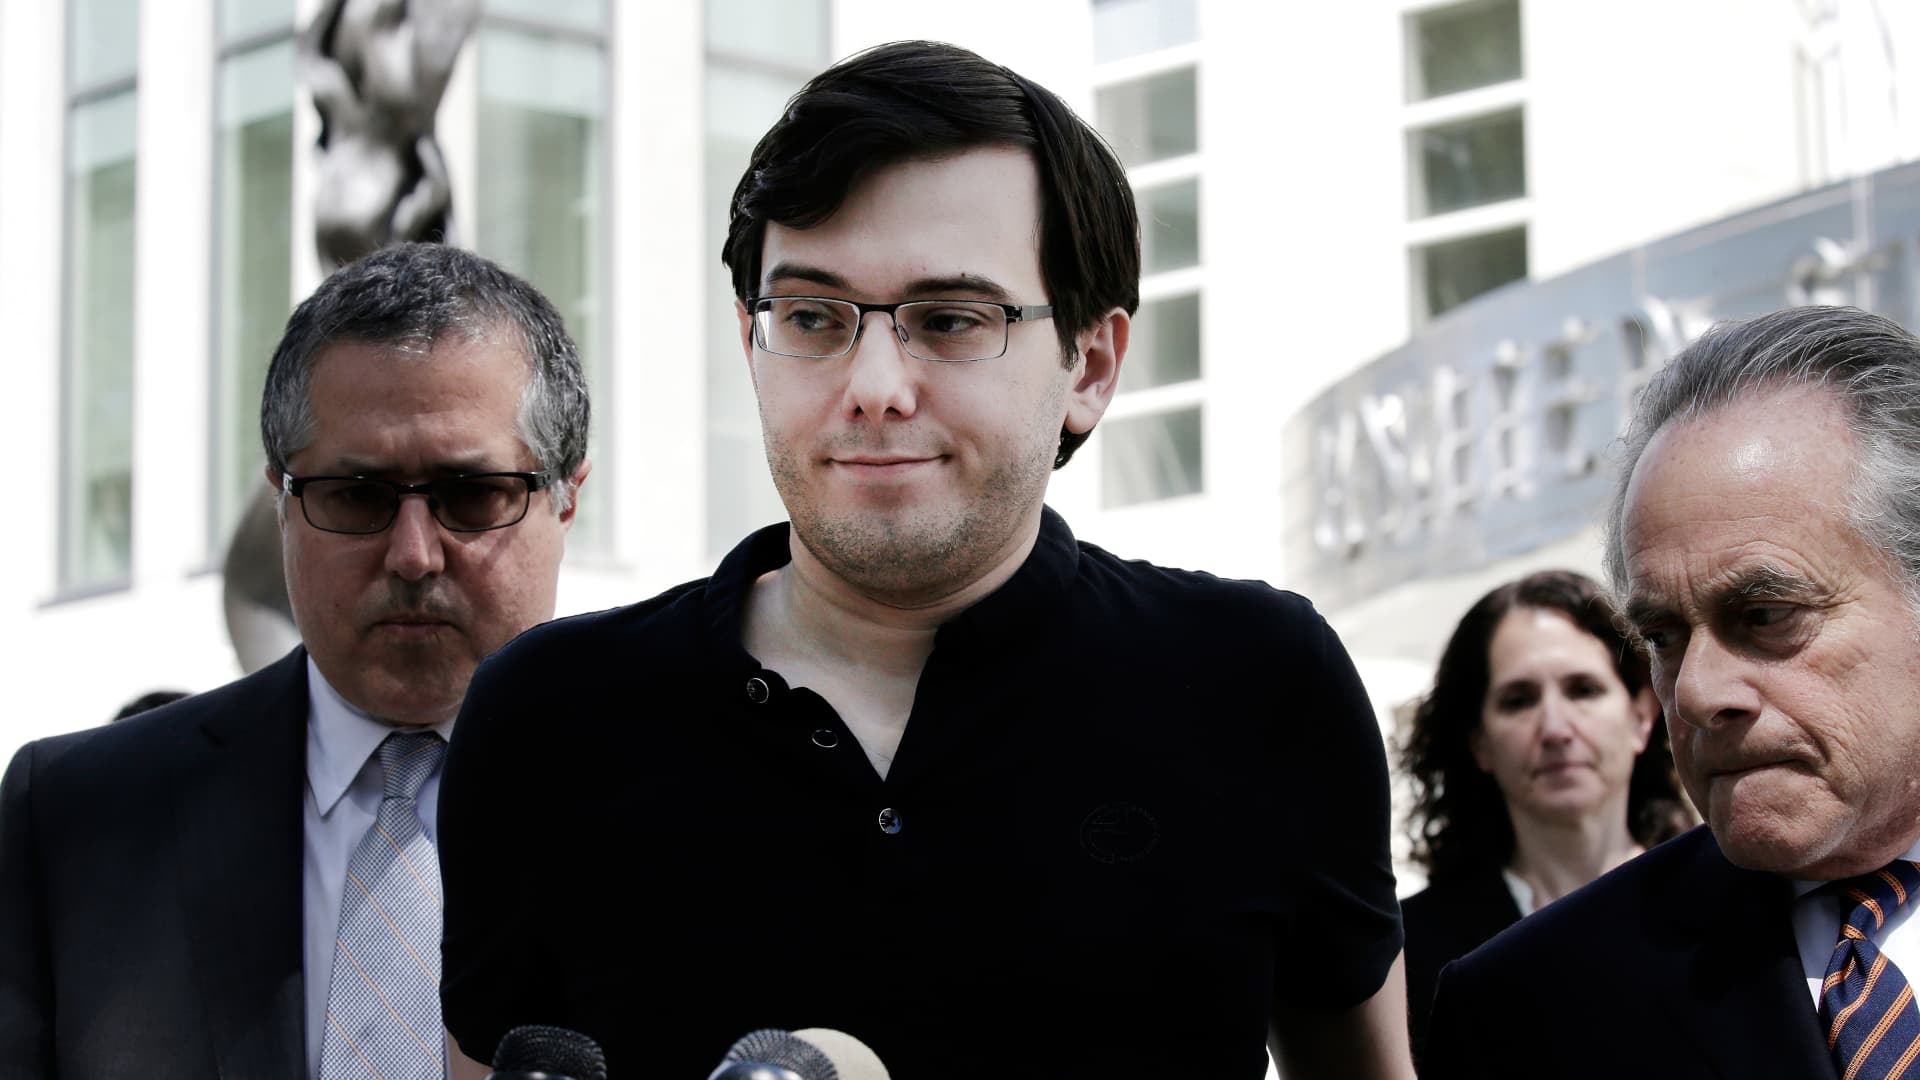 Judge rejects bid by ‘Pharma Bro’ Martin Shkreli to delay paying more than $24.6..